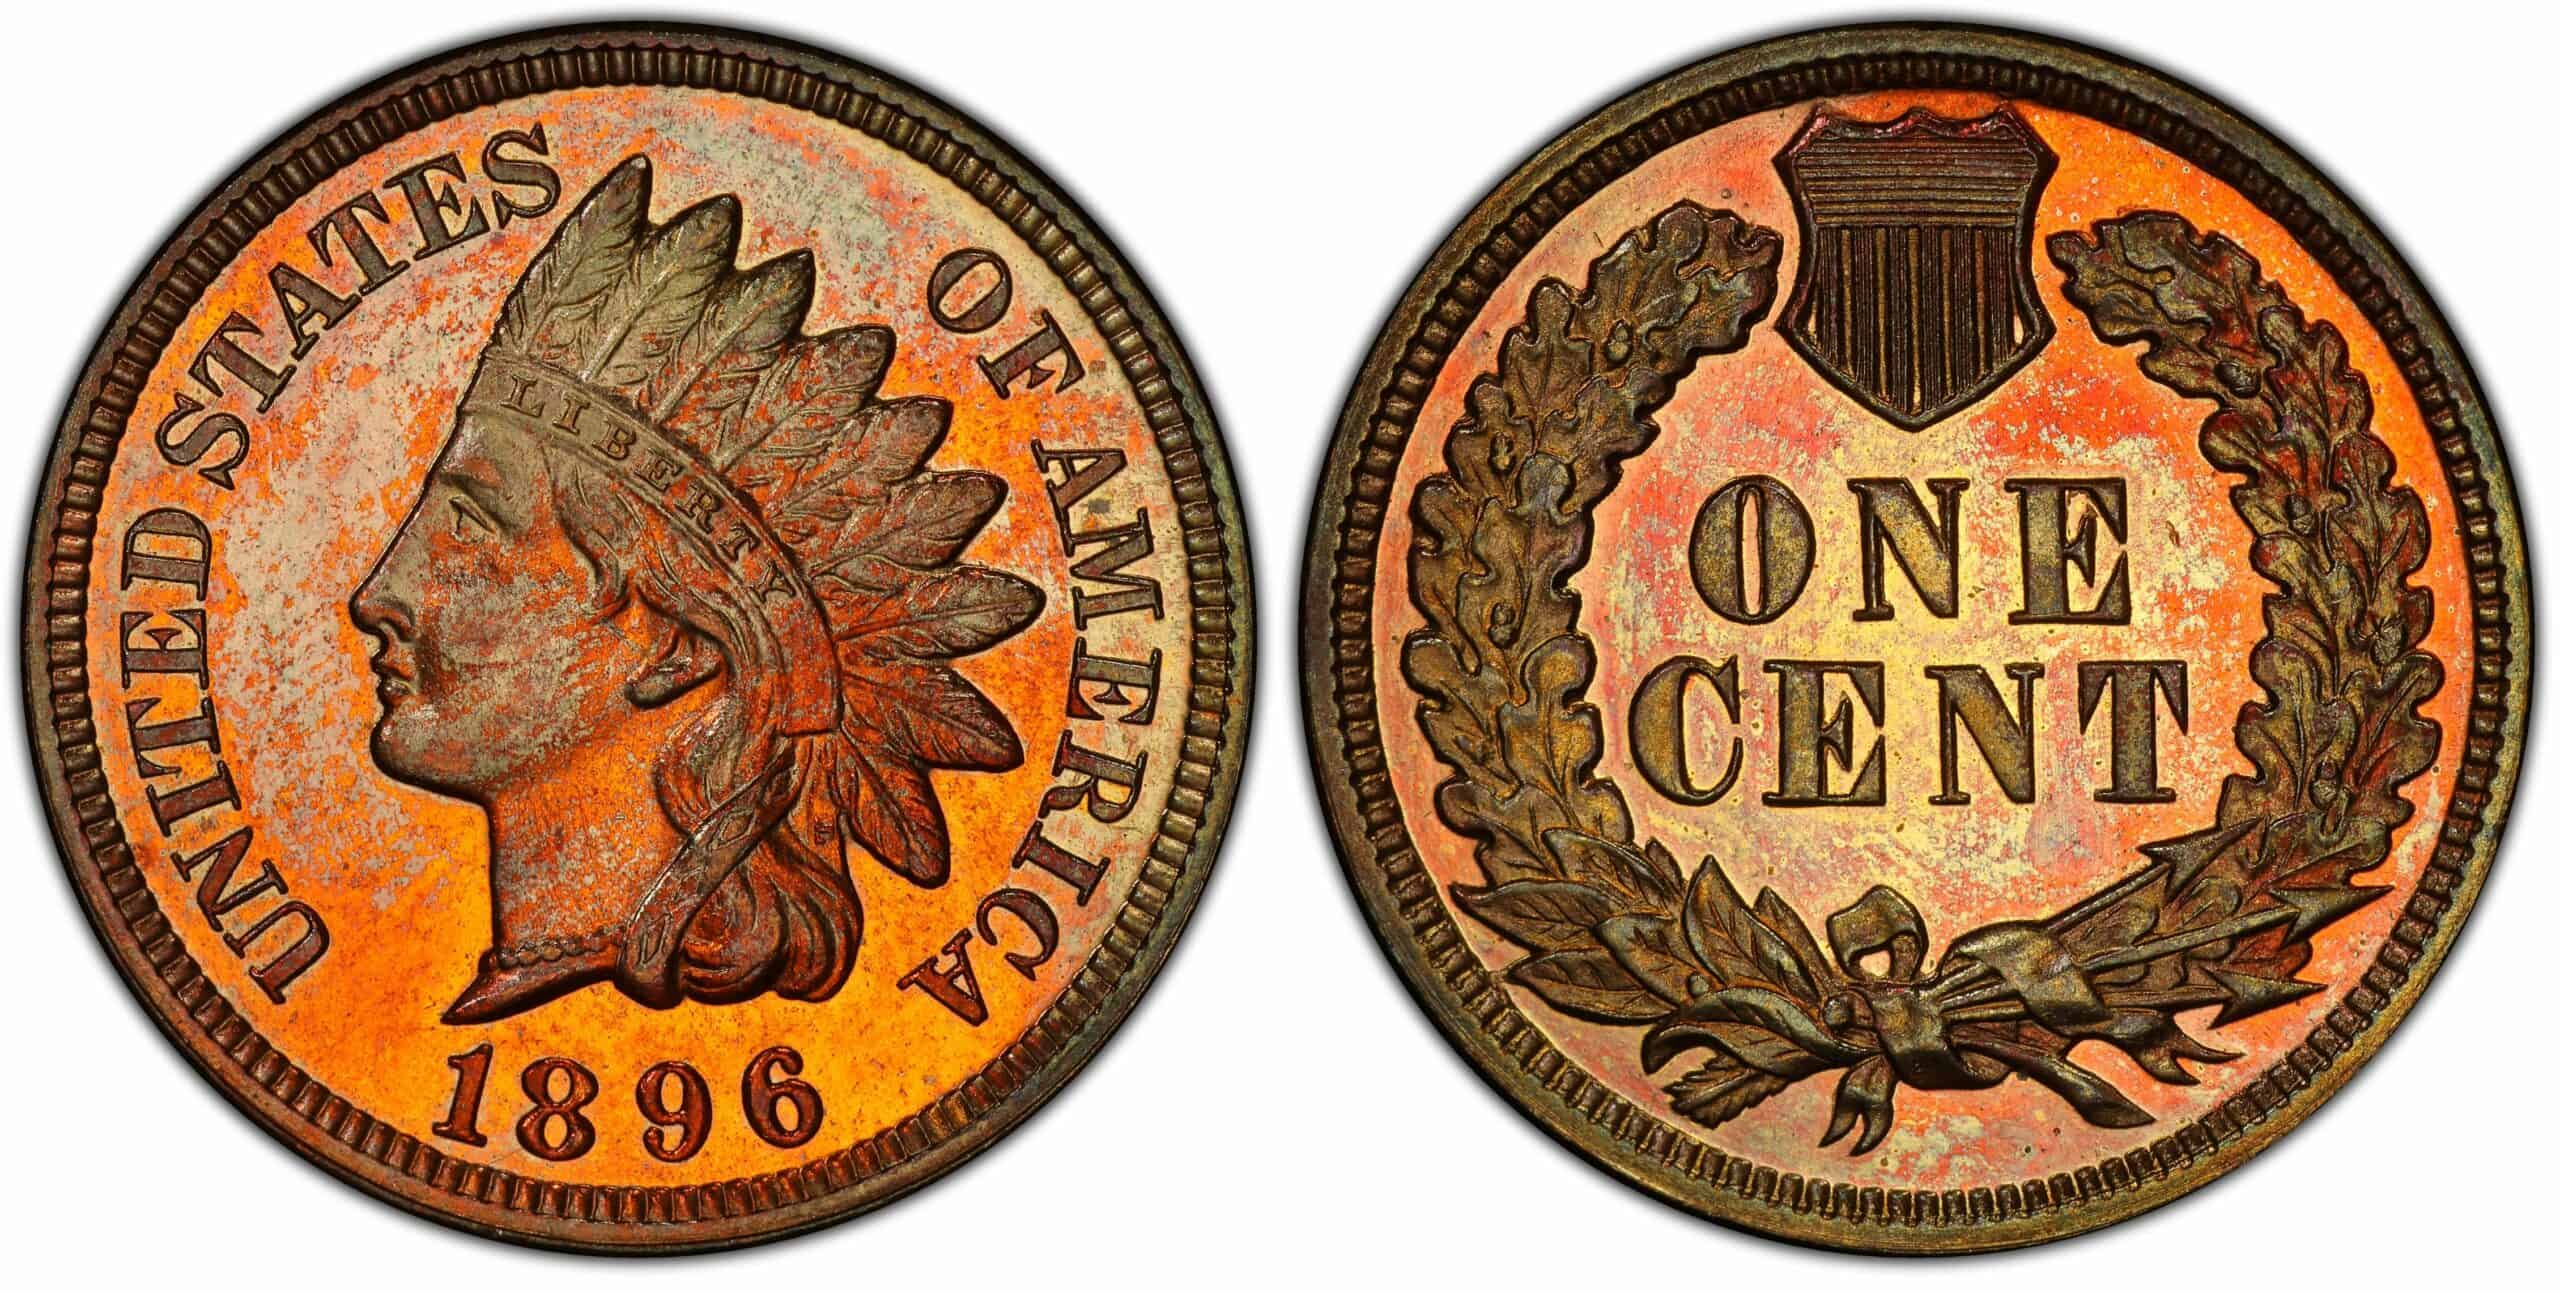 The 1896 Proof Indian Head Penny Value